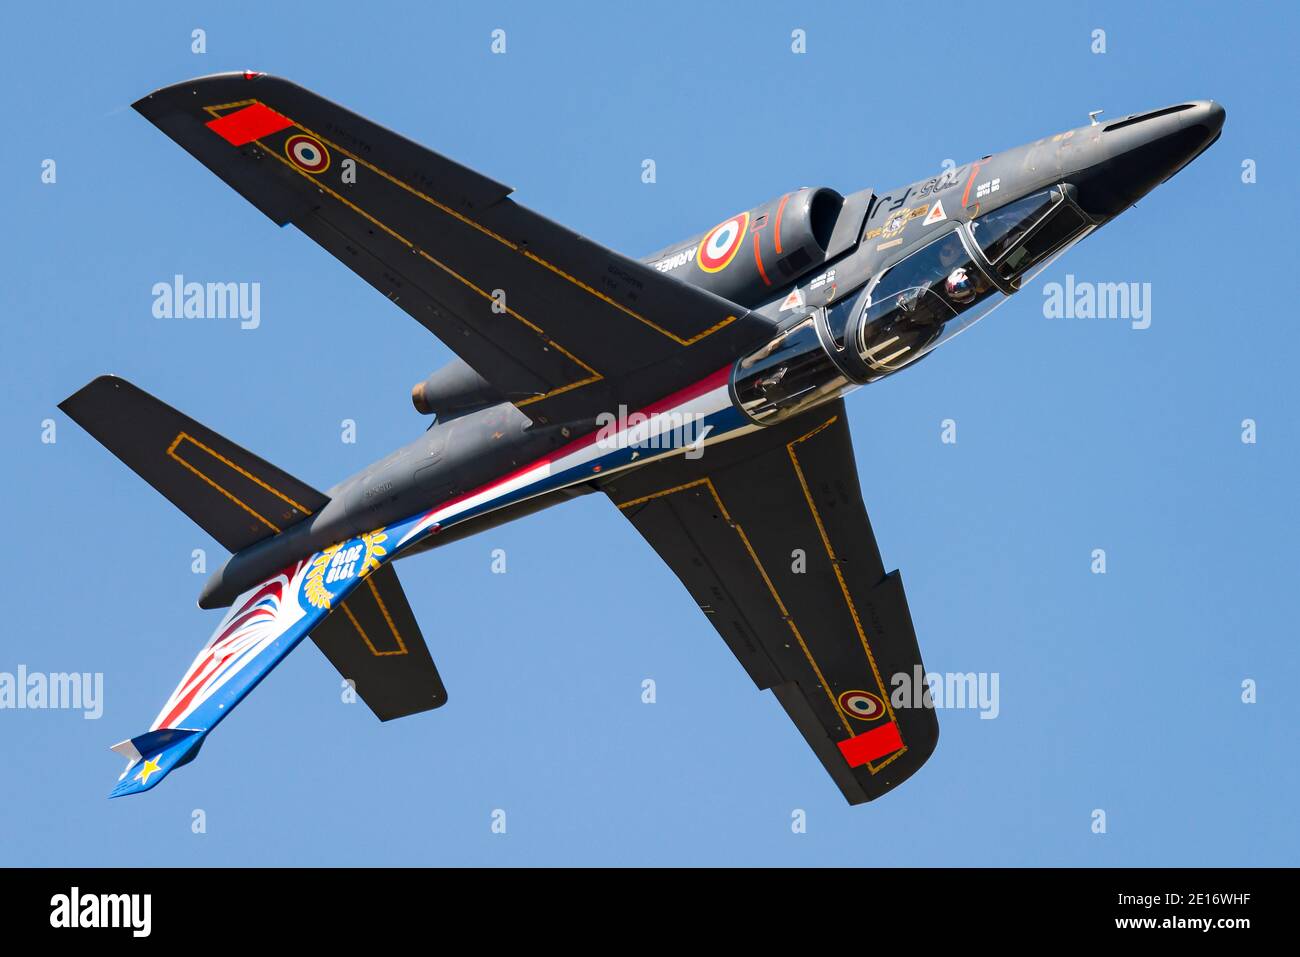 A Dassault/Dornier Alpha Jet jet trainer of the French Air Force during an airshow. Stock Photo